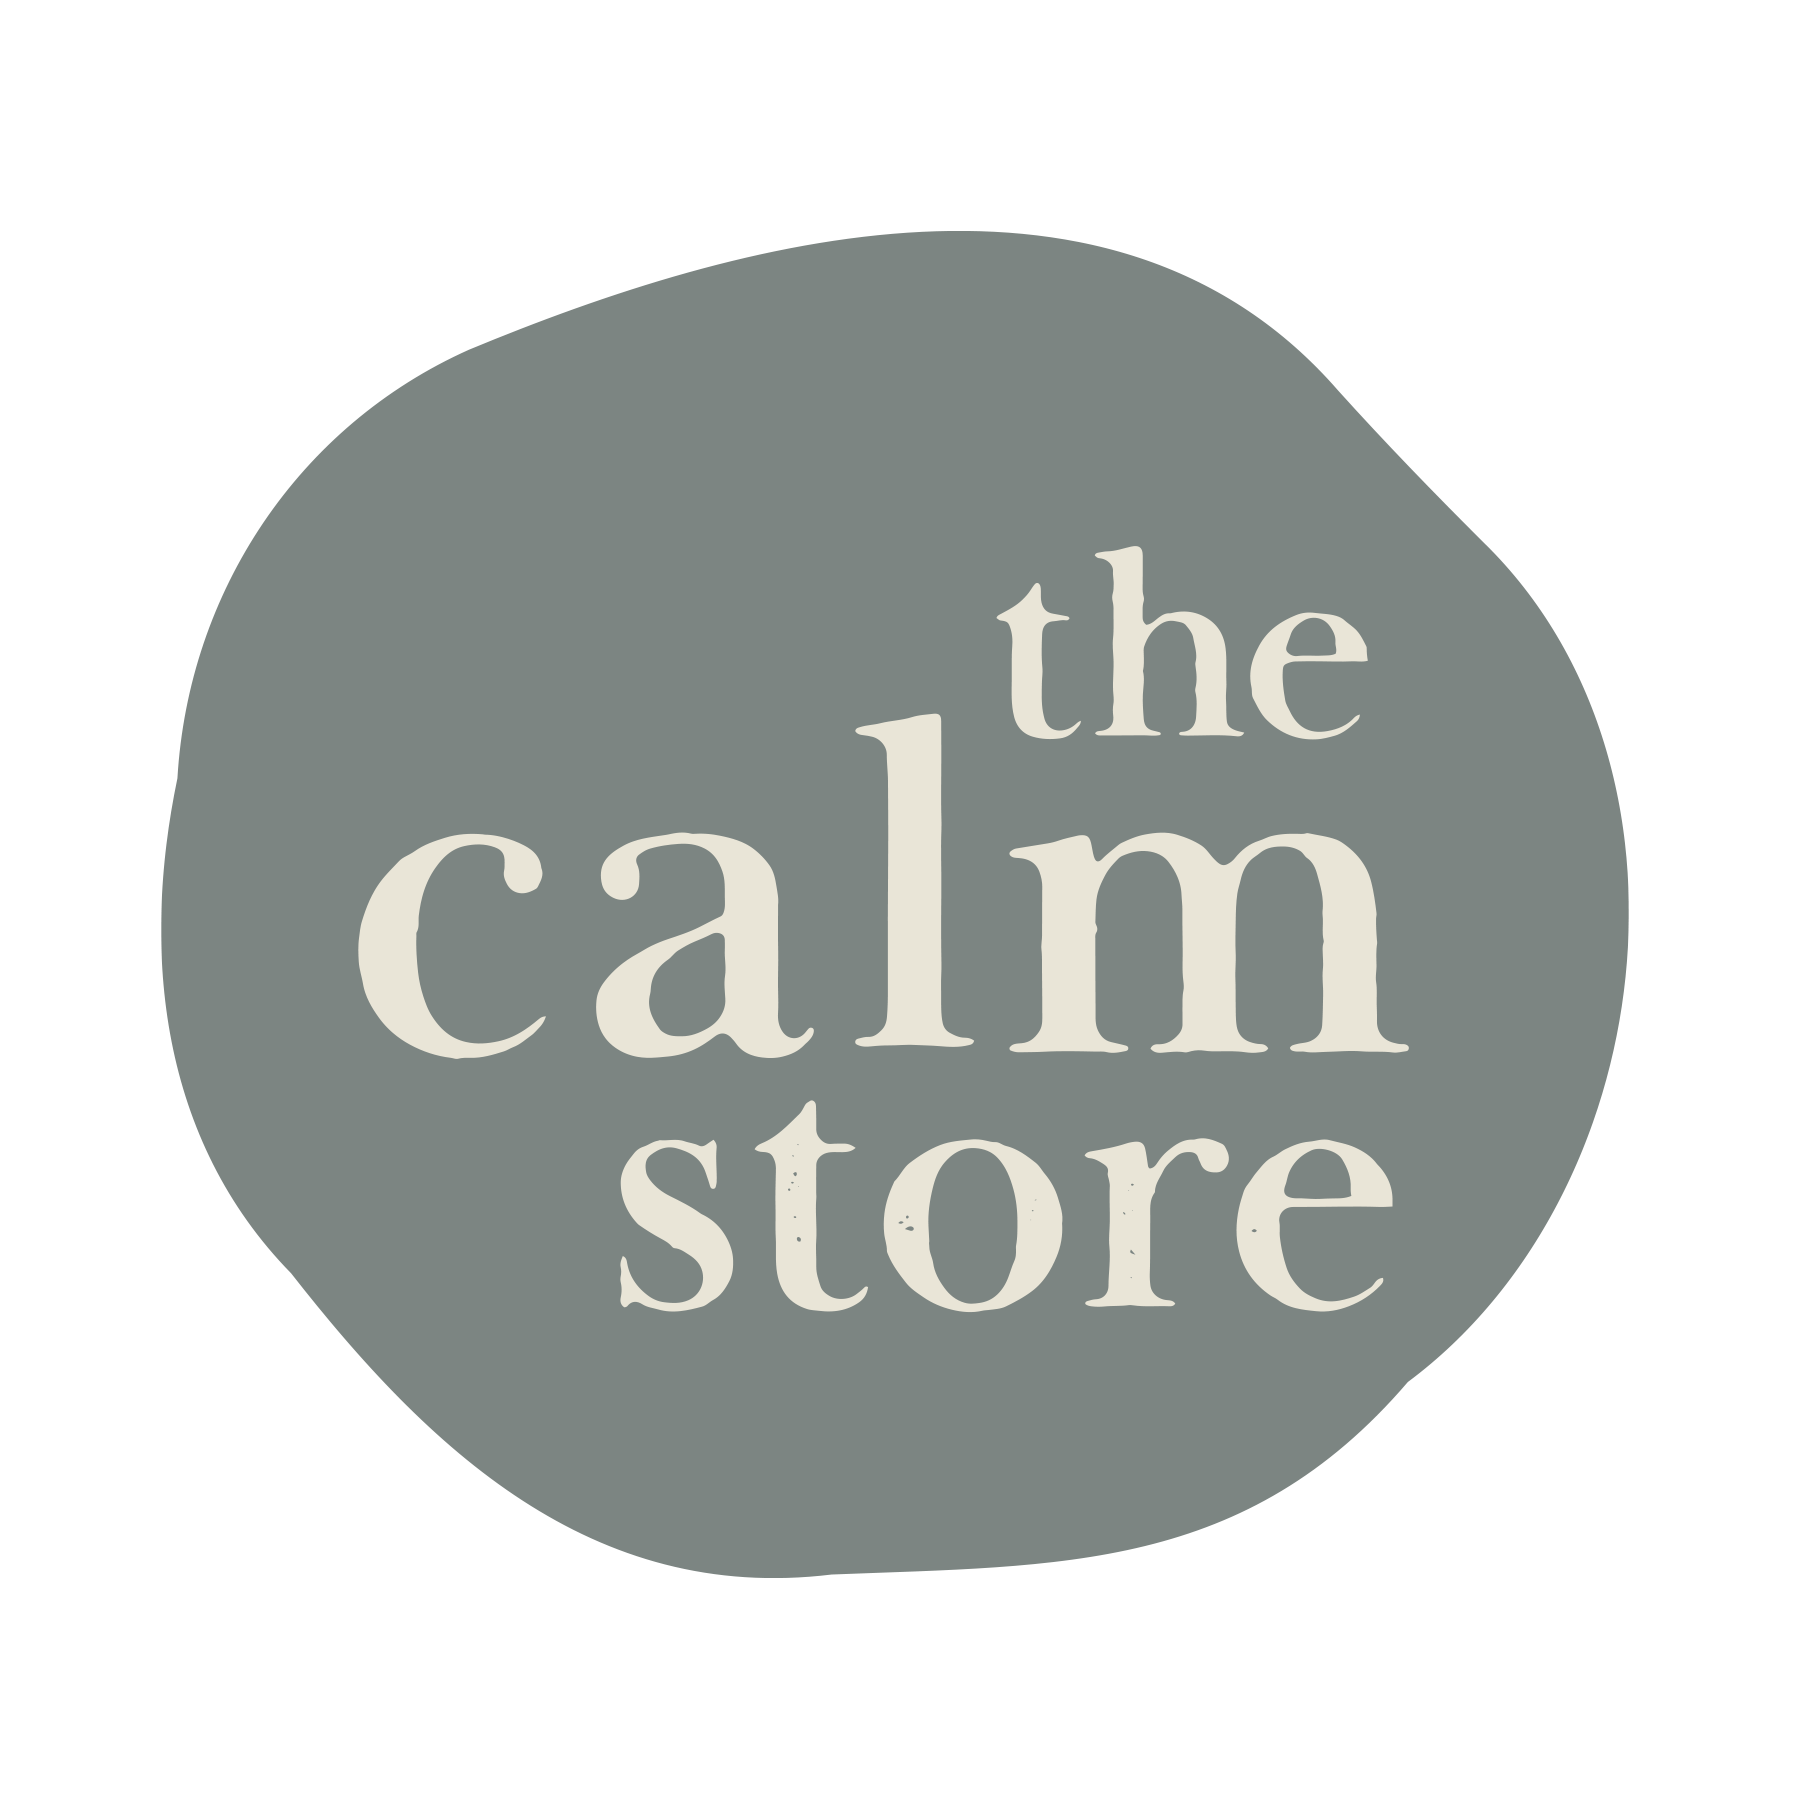 The Calm Store logo - Online Gift Card